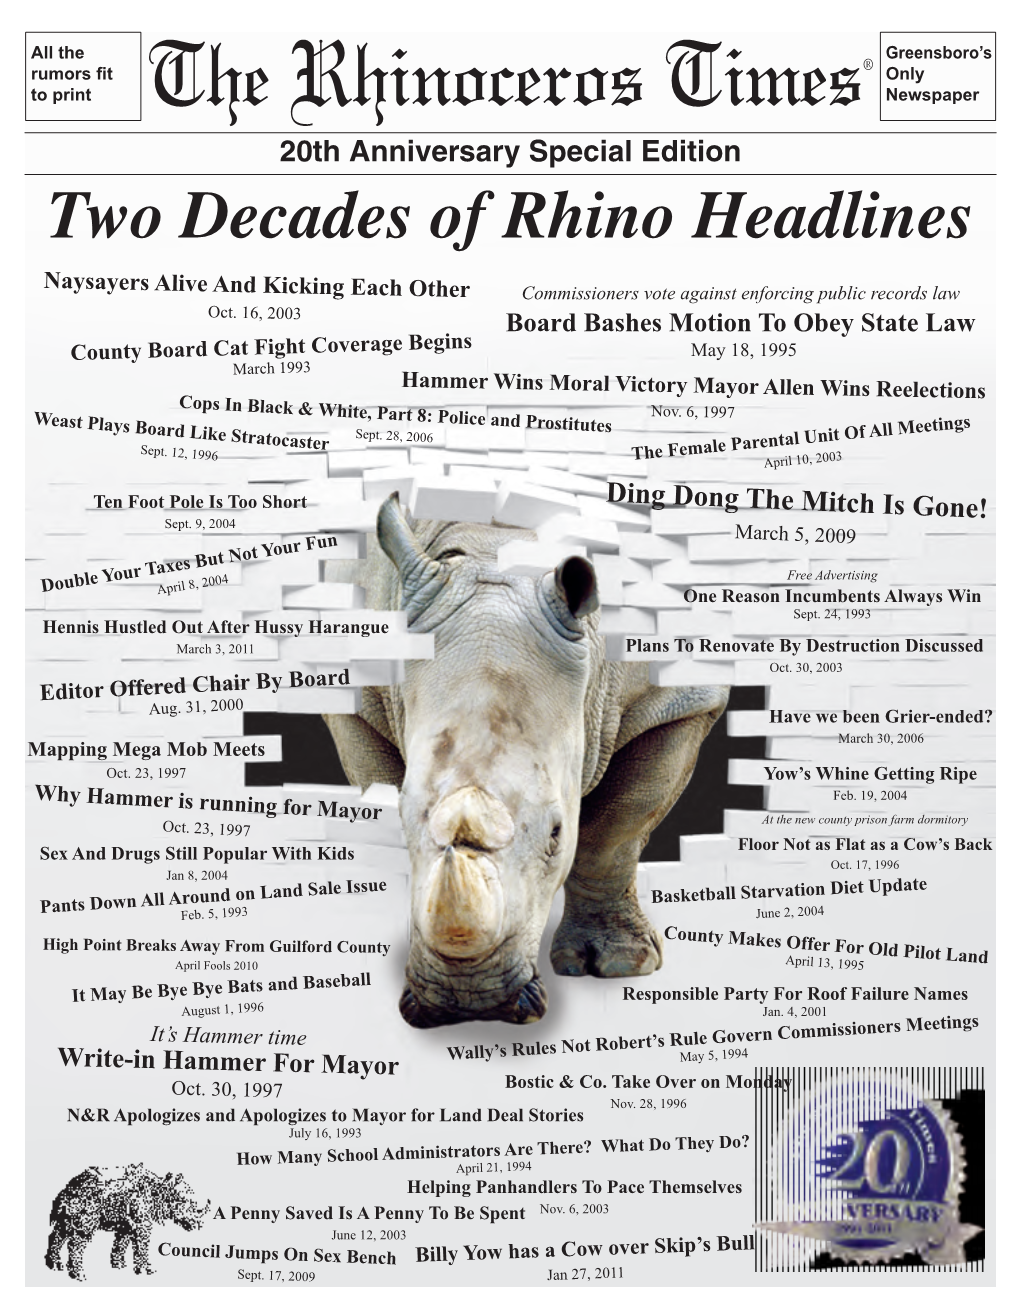 Two Decades of Rhino Headlines Naysayers Alive and Kicking Each Other Commissioners Vote Against Enforcing Public Records Law Oct